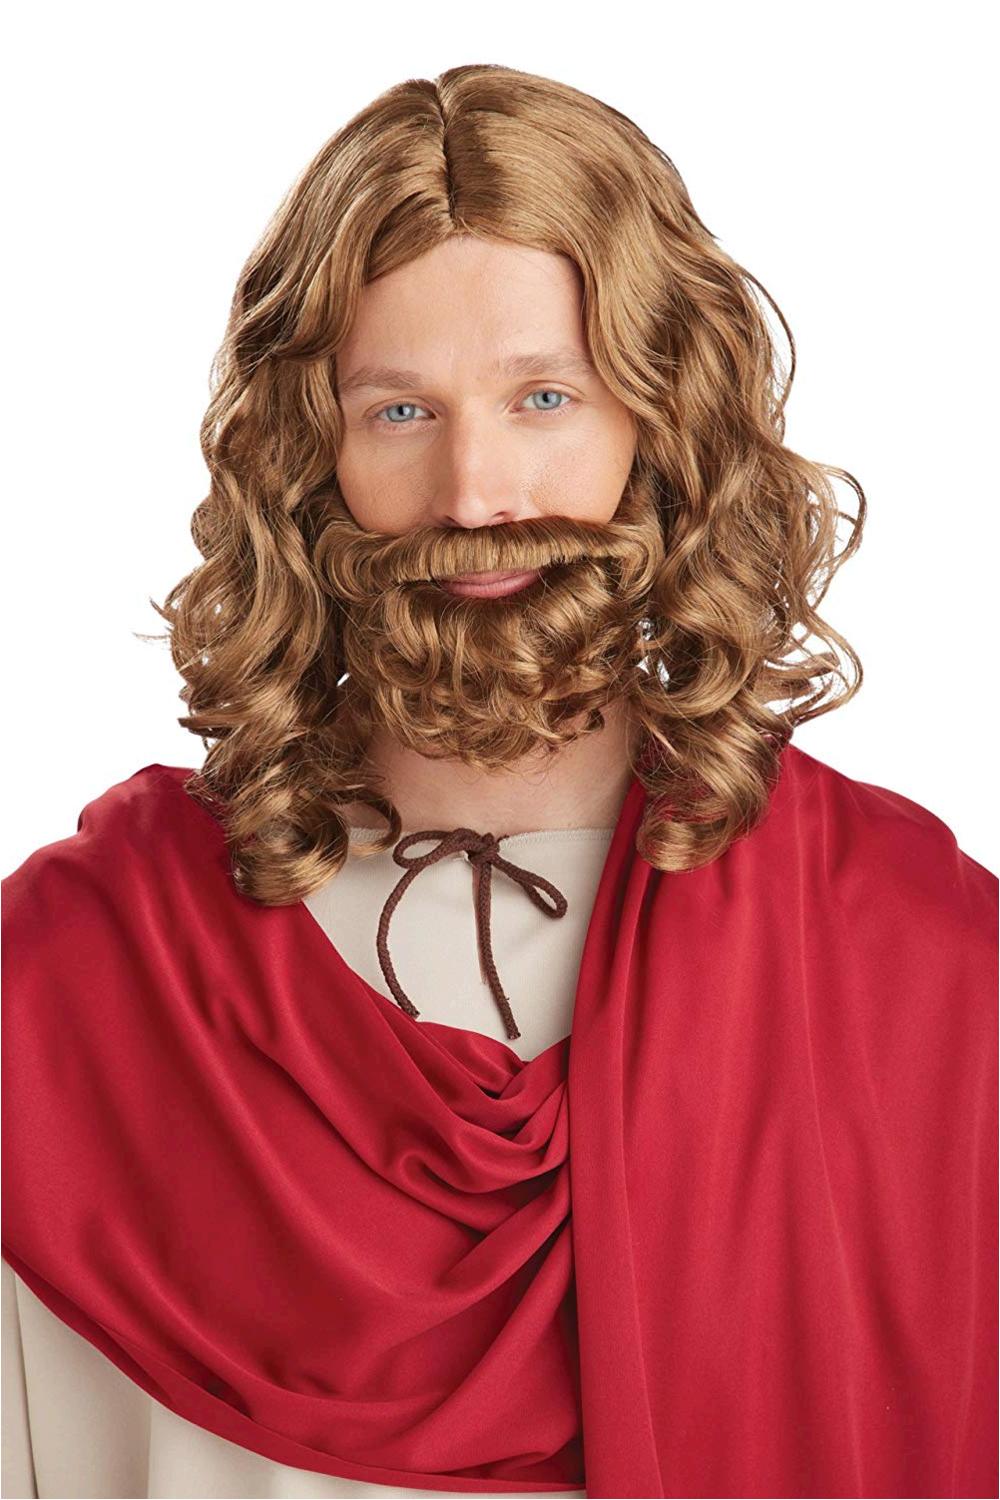 California Costumes Men's Jesus Wig and Beard Adult,, Brown, Size One ...